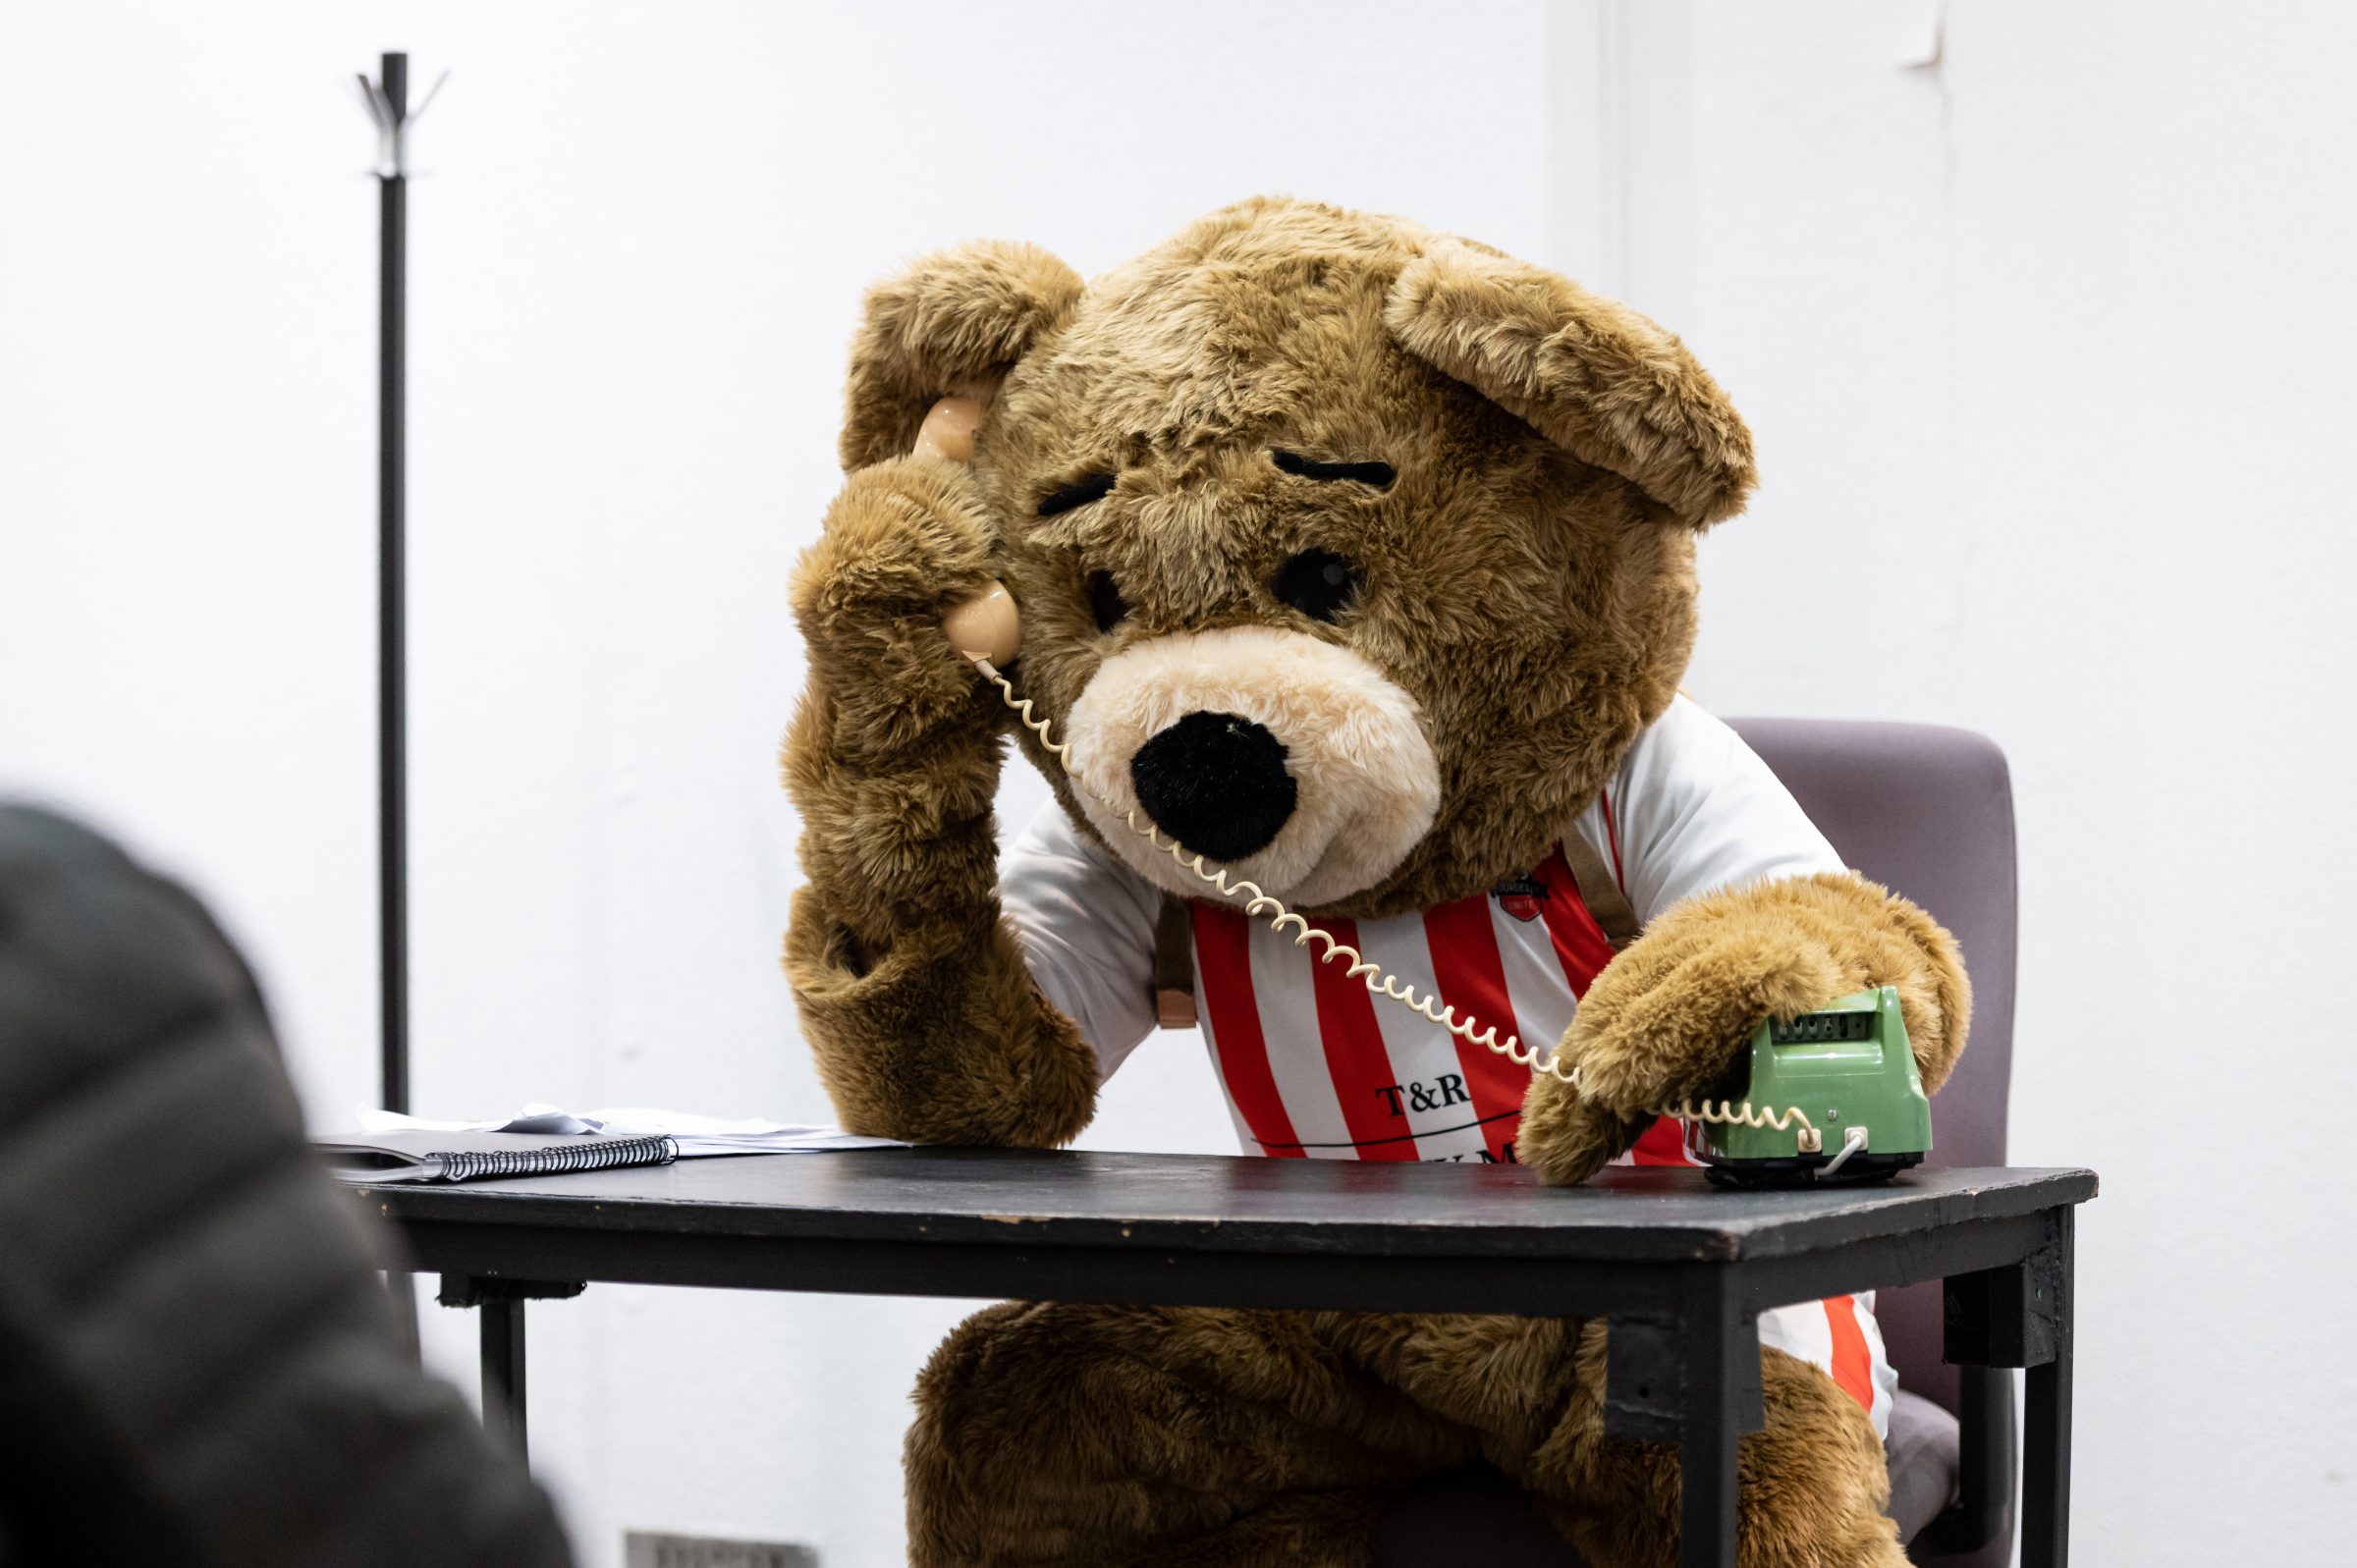  A person is dressed in a teddy bear costume sitting behind a desk. They are holding an old fashioned phone to their bear head ear. They are a football mascot and so on top of the bear costume they are wearing a red and white striped football shirt